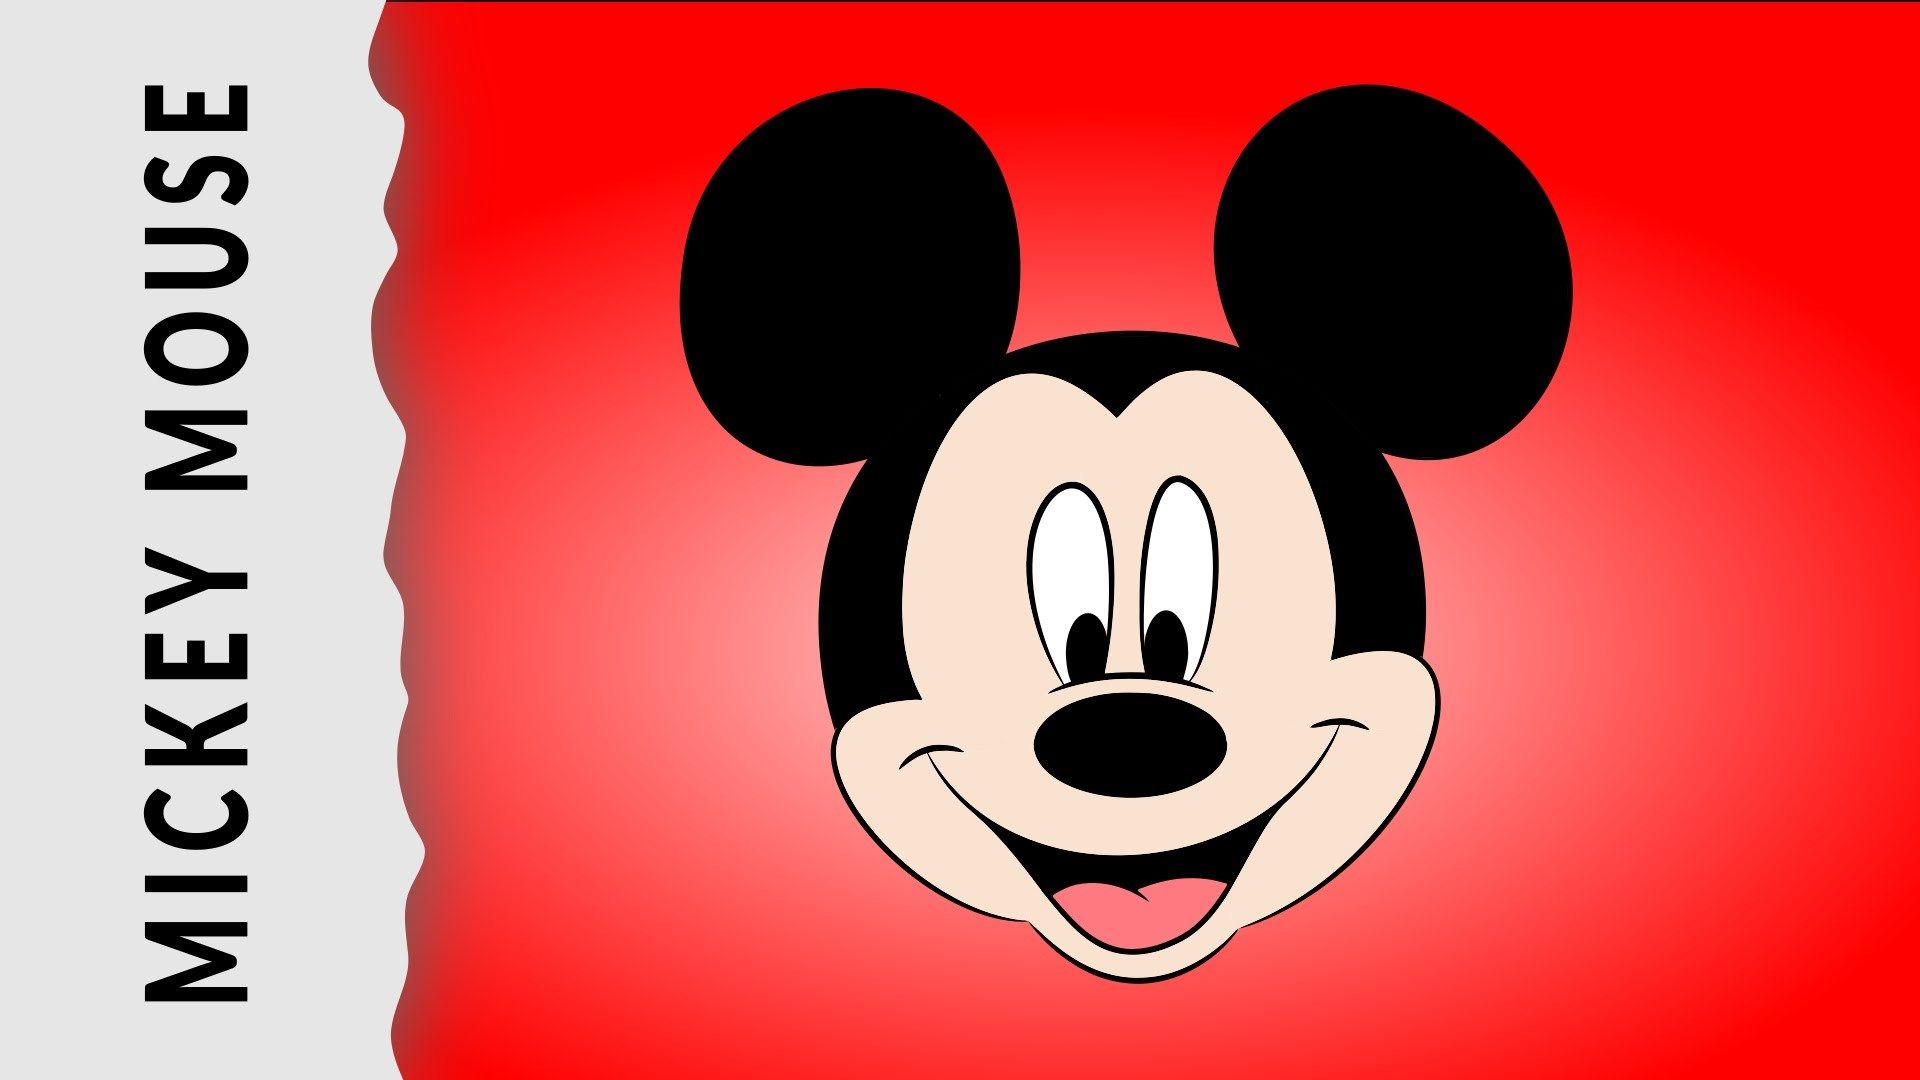 1920x1080 mickey mouse desktop background picture free JPG 125 kB Gallery HD Wallpaper